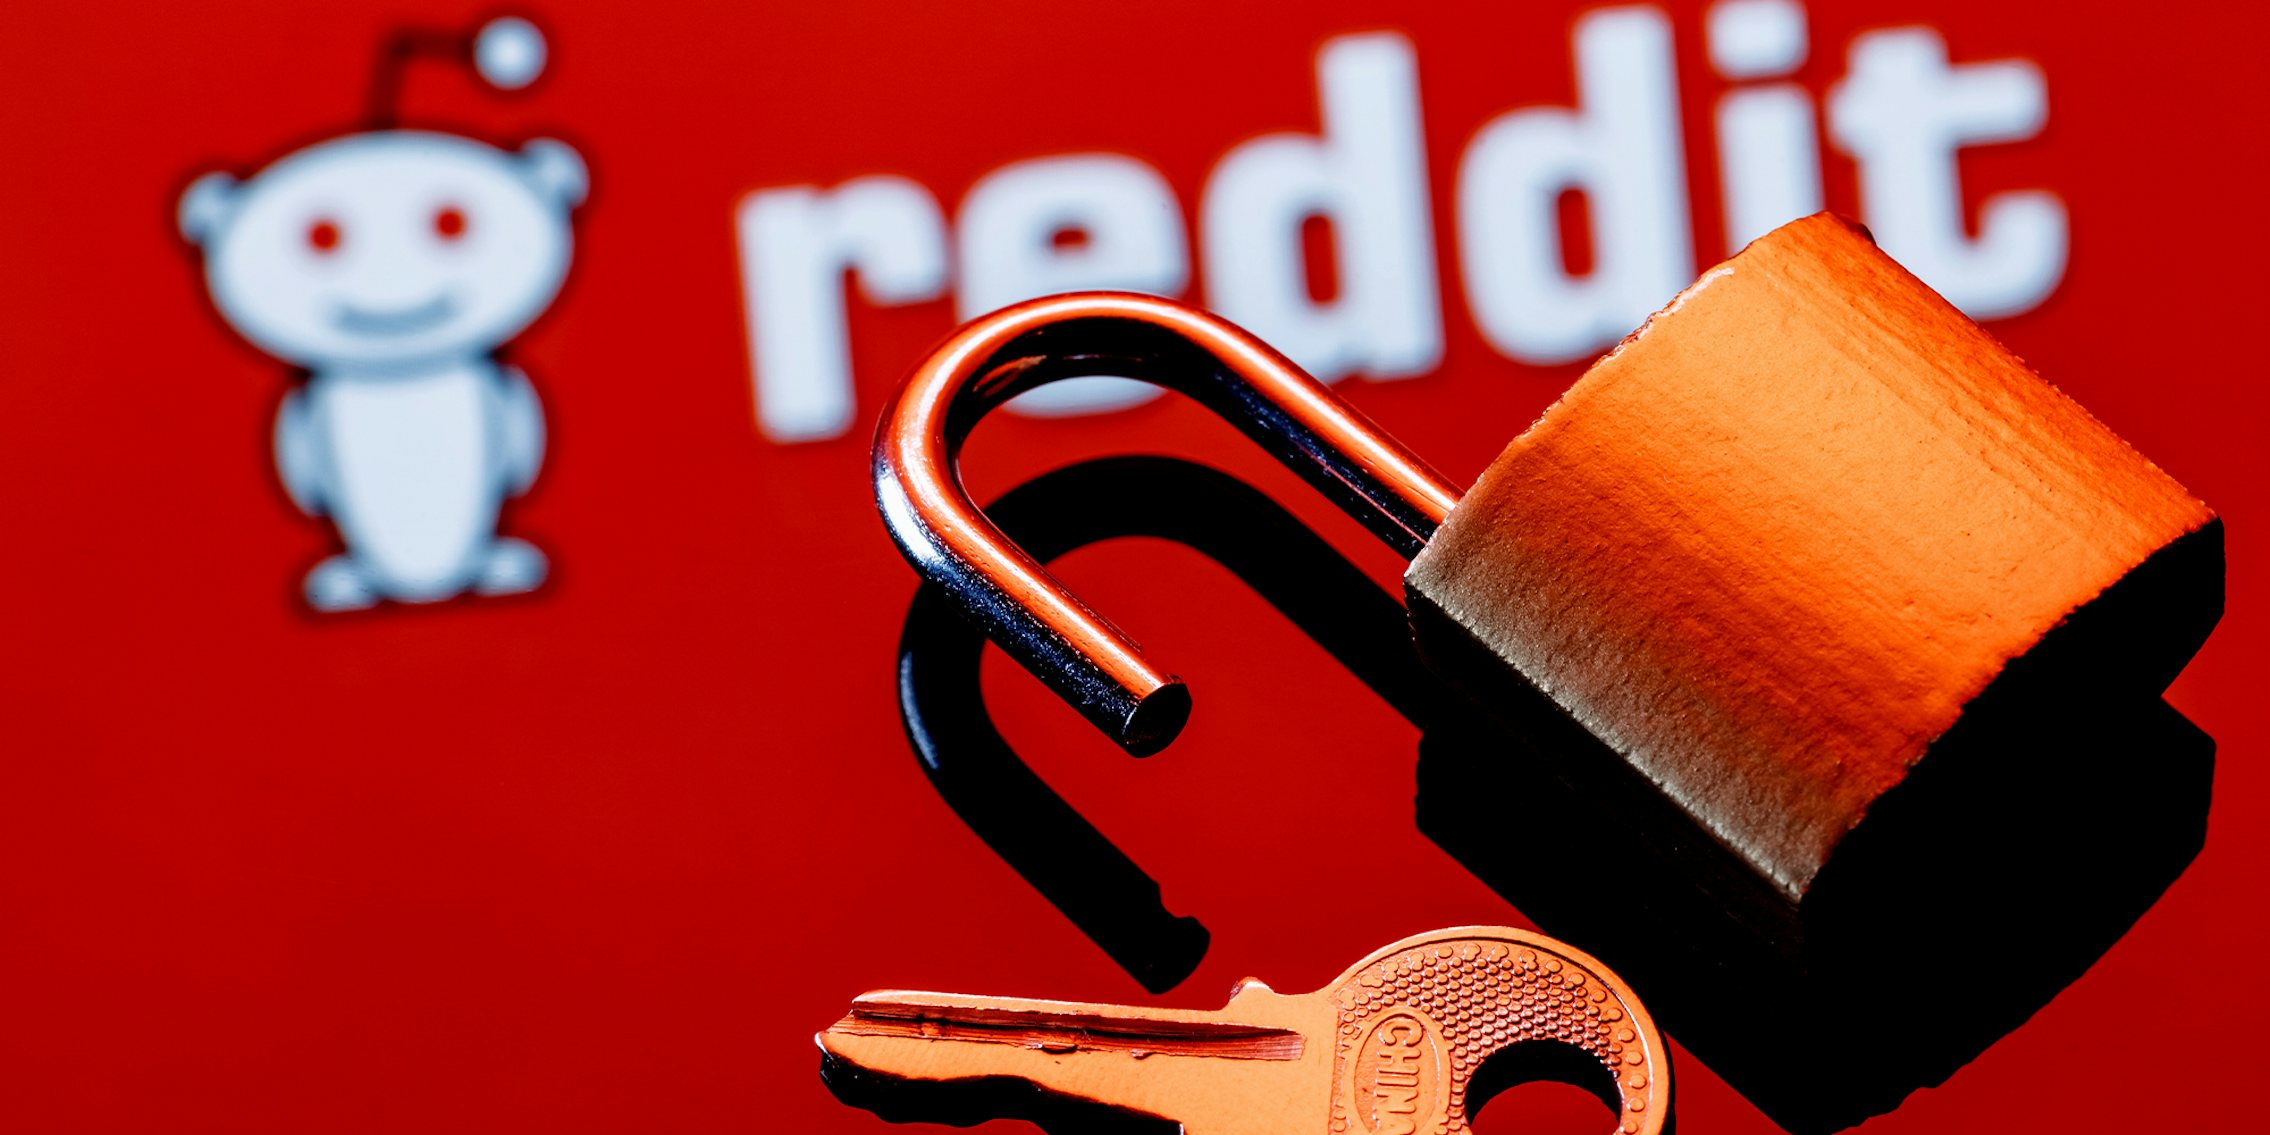 Hackers blackmail Reddit over third-party app plans; An open security lock and key on the background of the Reddit discussion platform logo in the mirror reflection.